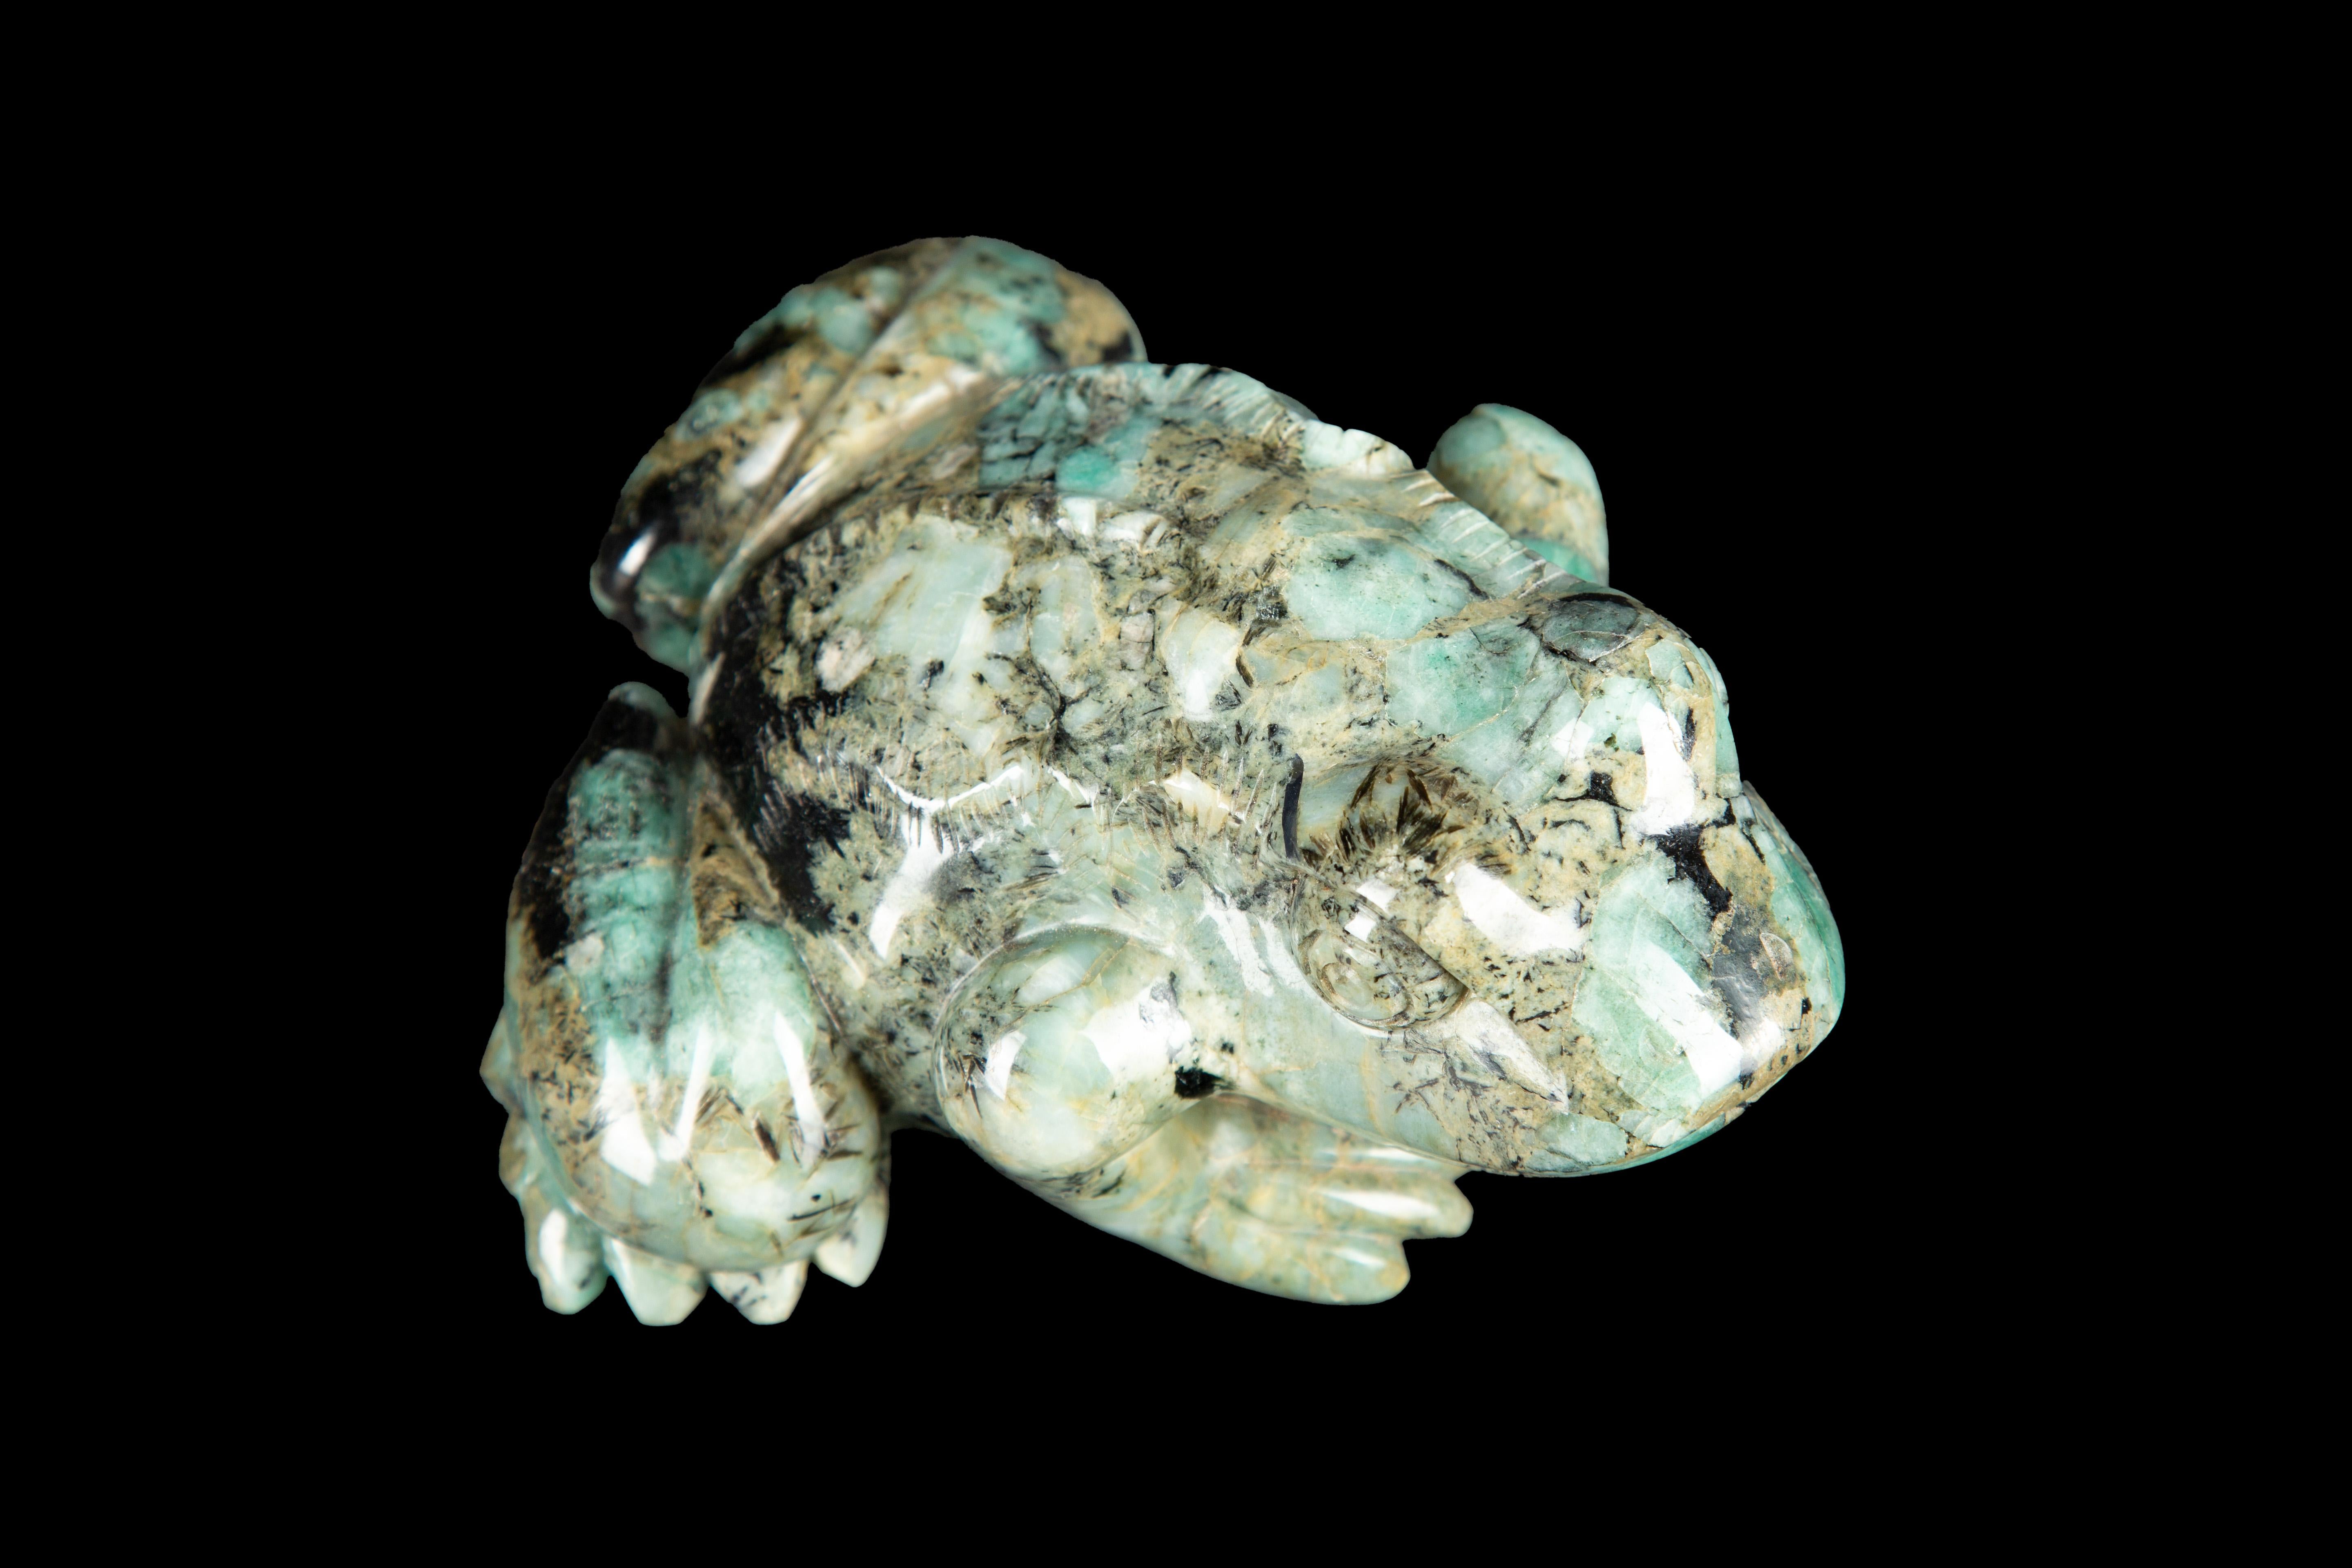 This Carved Beryl Emerald Frog is a stunning work of art that showcases the beauty and intricacy of carved gemstones. Made from beryl emerald, this frog figurine is expertly crafted and features intricate details that are sure to impress anyone who